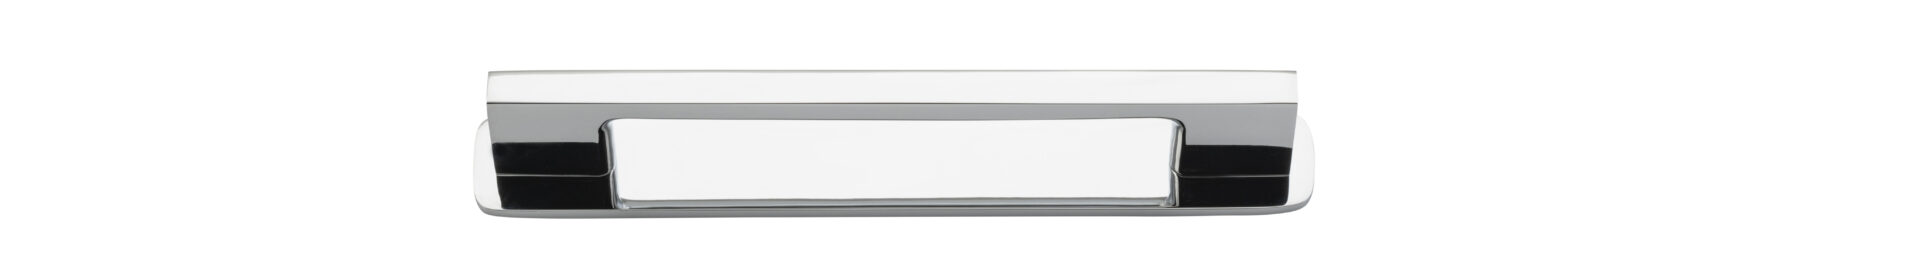 0531B - Cali Cabinet Pull with Backplate - CTC 128mm - Polished Chrome